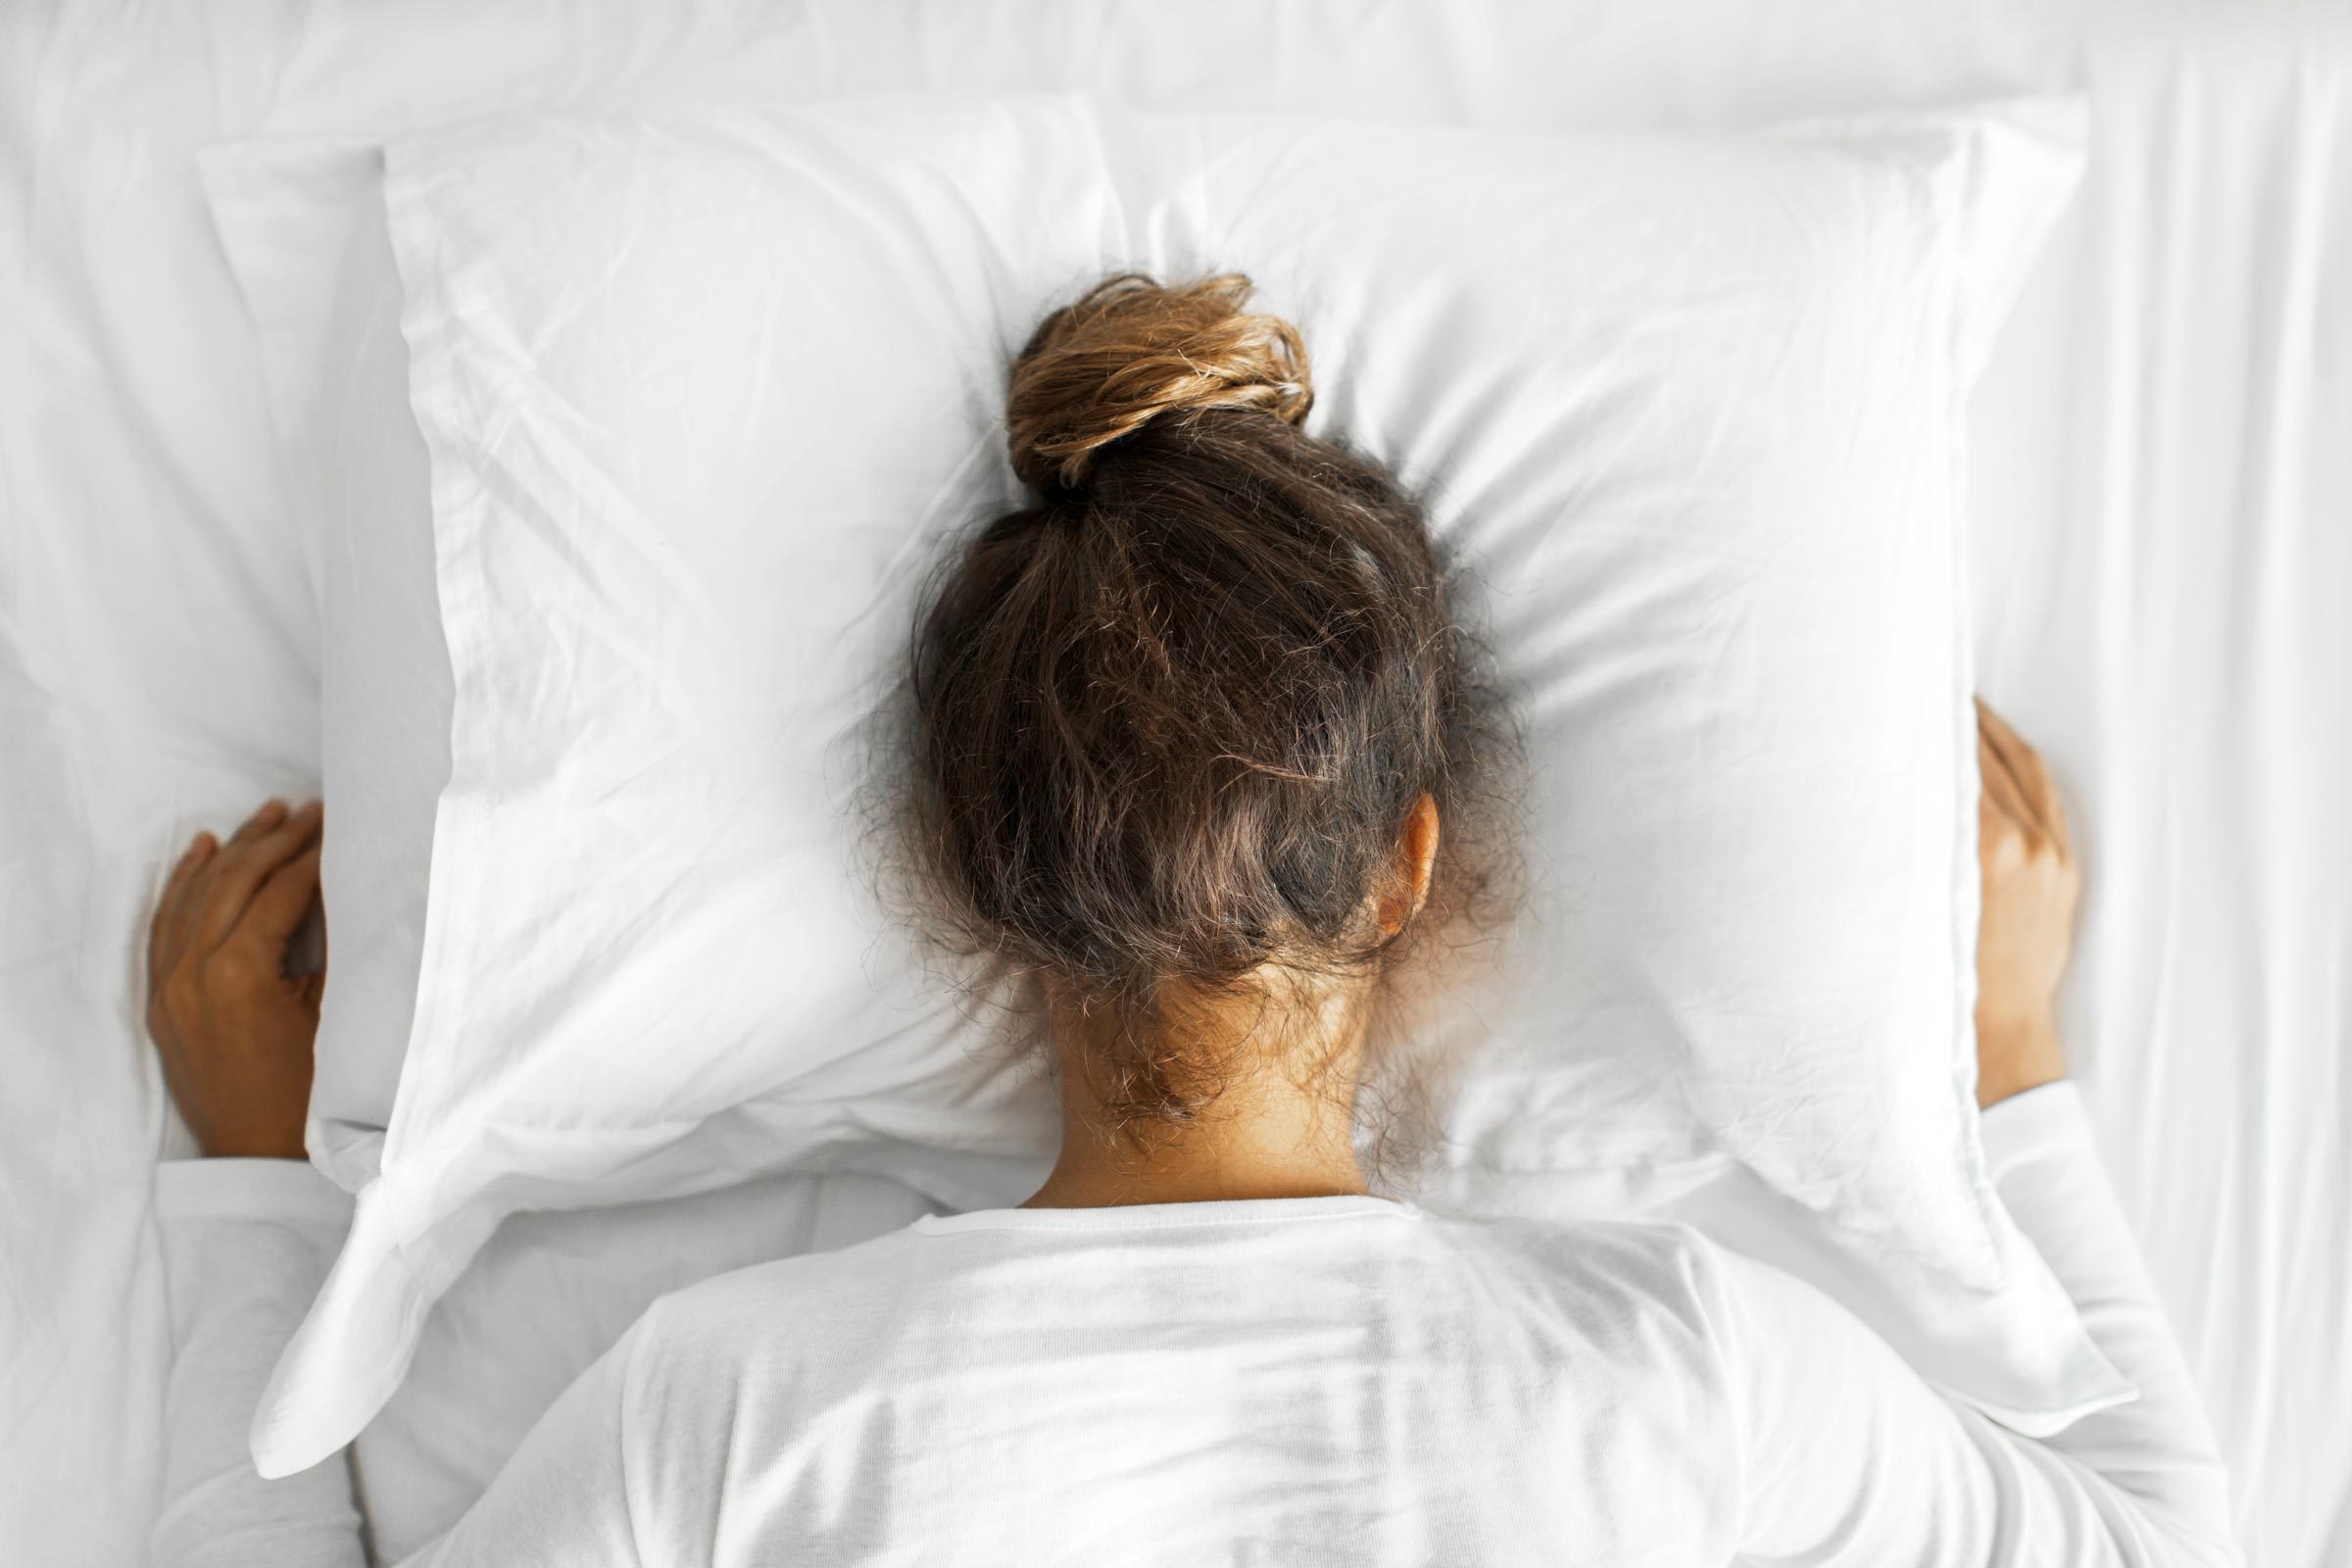 New Research: Getting Only This Much Sleep Nightly Raises a Woman's Diabetes Risk